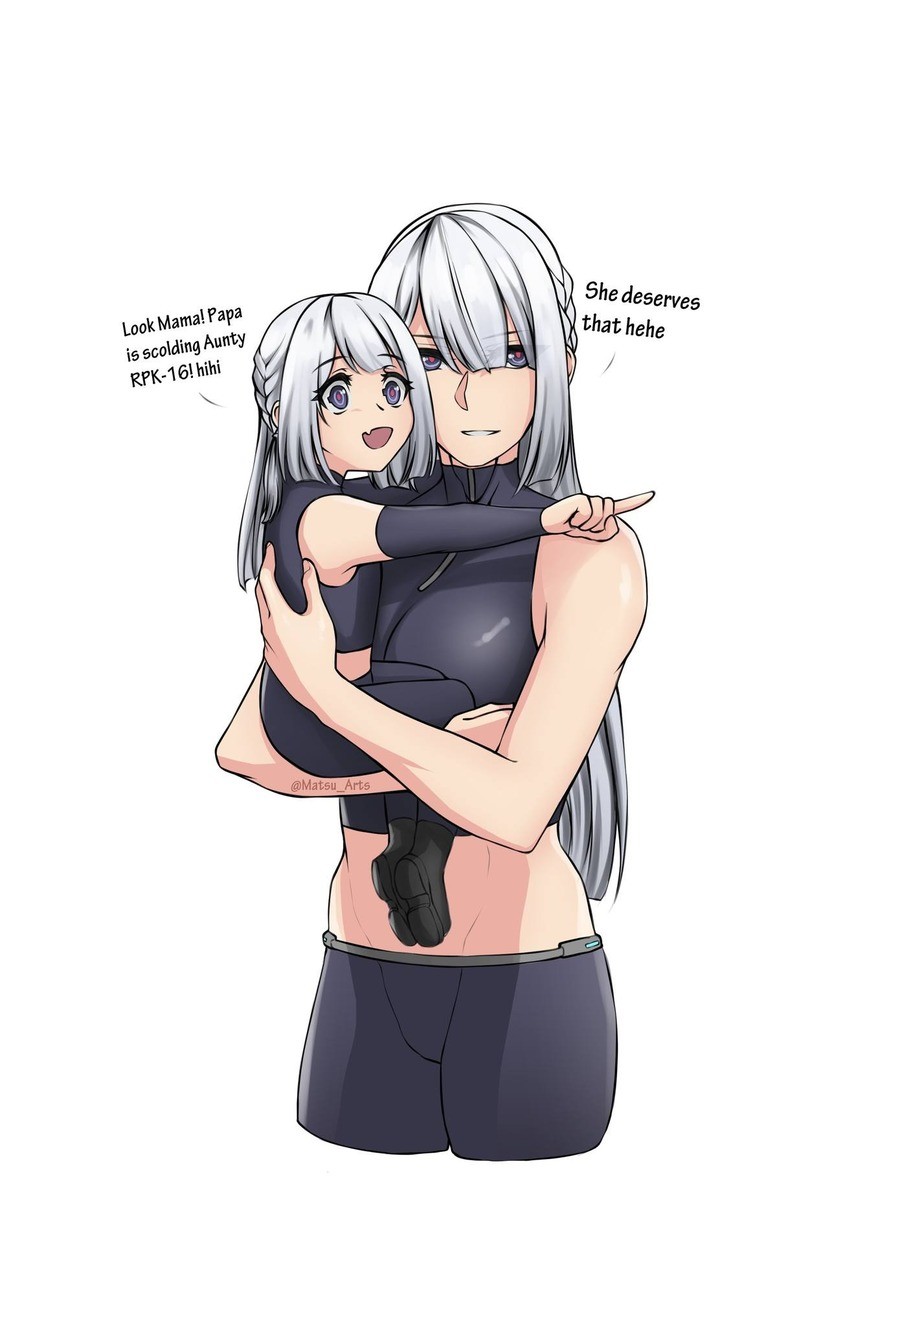 AK-15 and her daughter. join list: GirlsFrontline (615 subs)Mention Clicks: 148992Msgs Sent: 609445Mention History.. 2 kinds of people